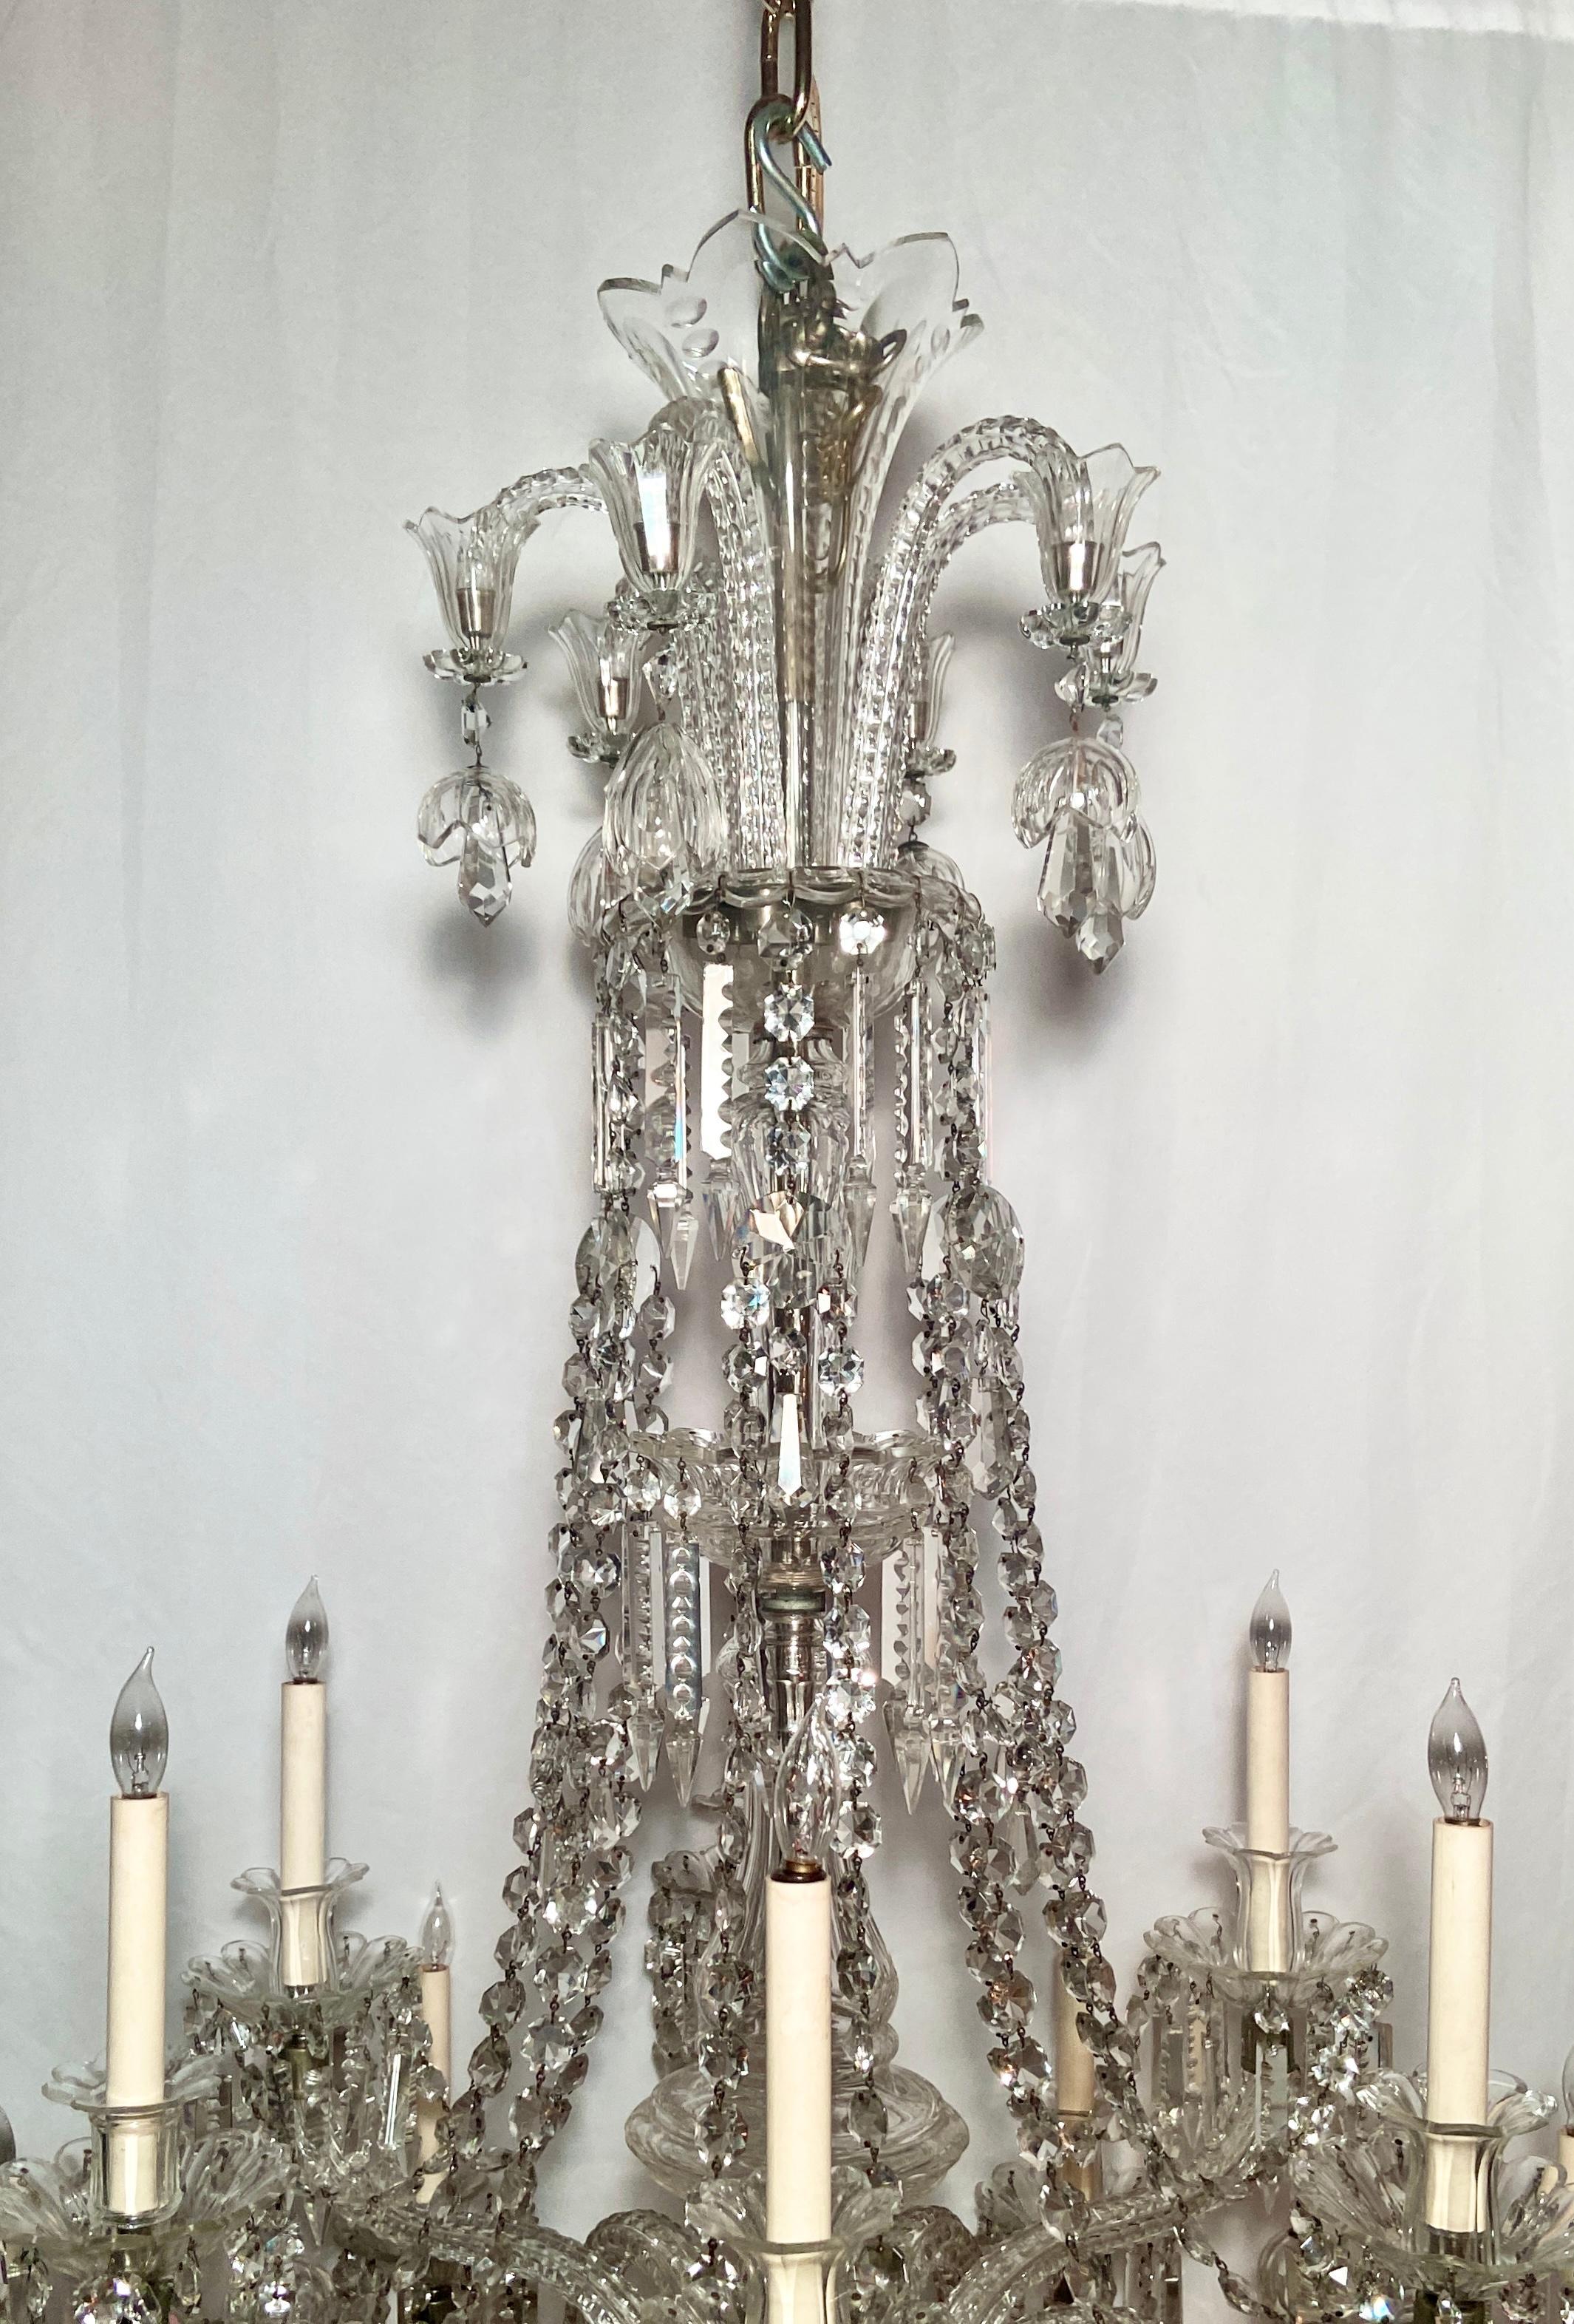 Magnificent antique 19th century all lead crystal chandelier.
Heavily draped with fabulous cut crystal prisms and beads along the all crystal stem and arms.